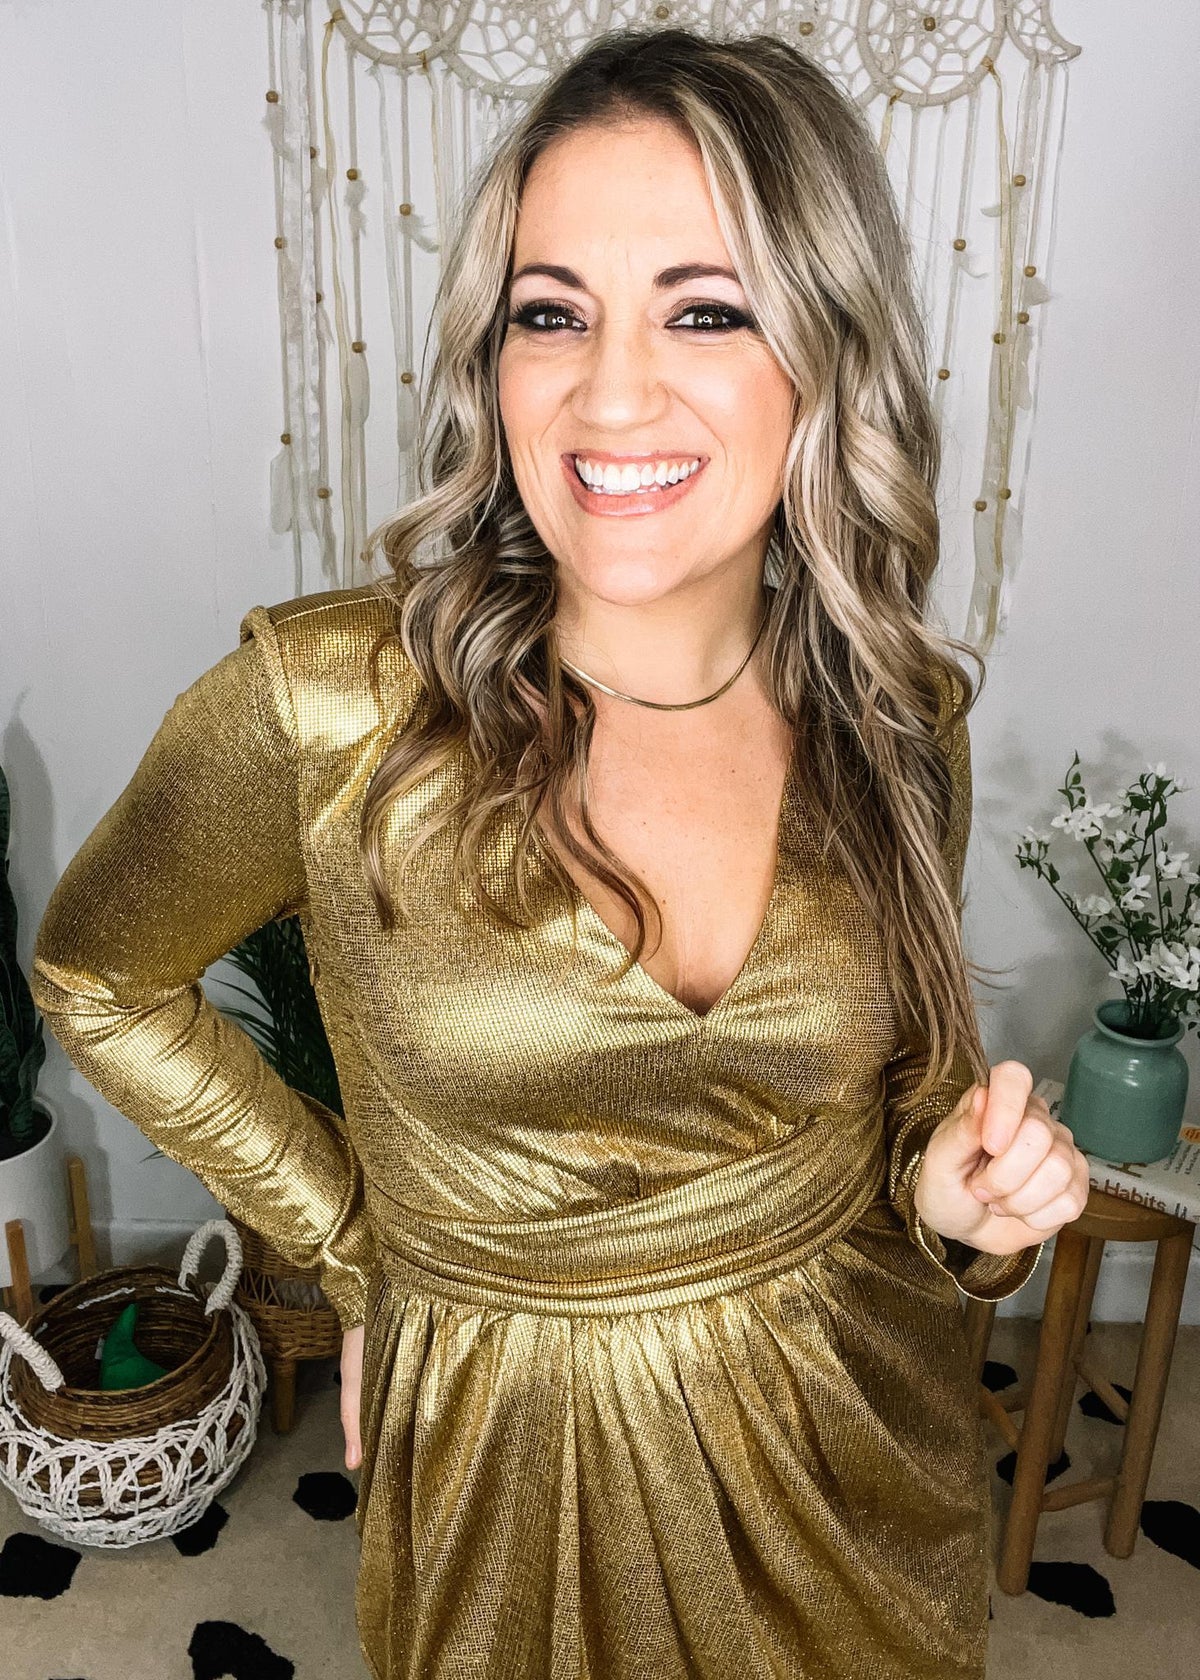 Gold Shimmery Long Sleeve Front Twist Cocktail Dress